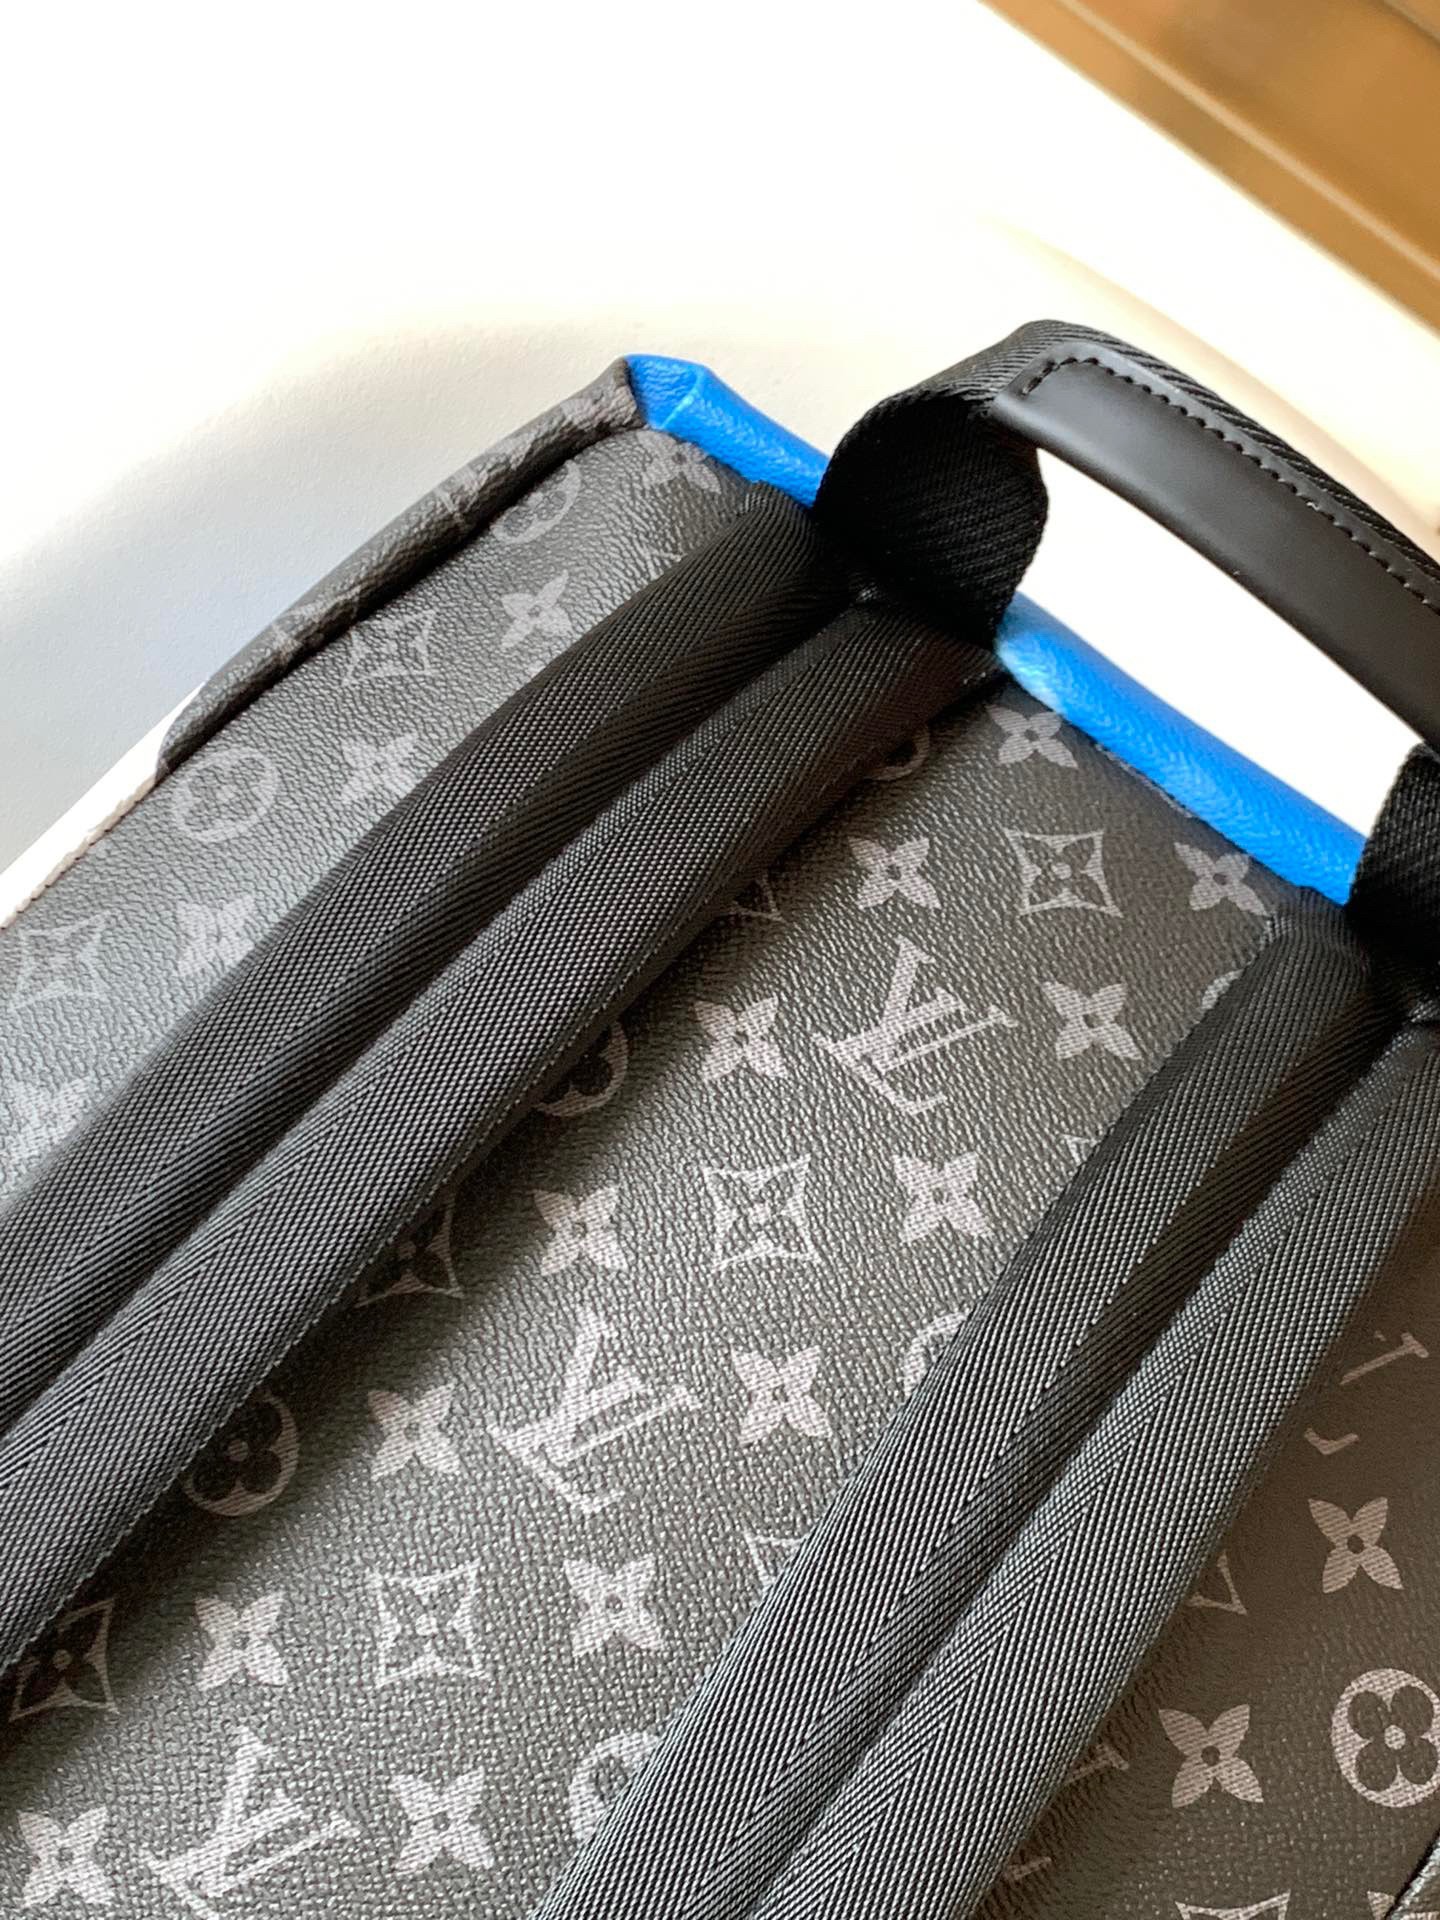 Replica Louis Vuitton Discovery Backpack In Sunrise Monogram